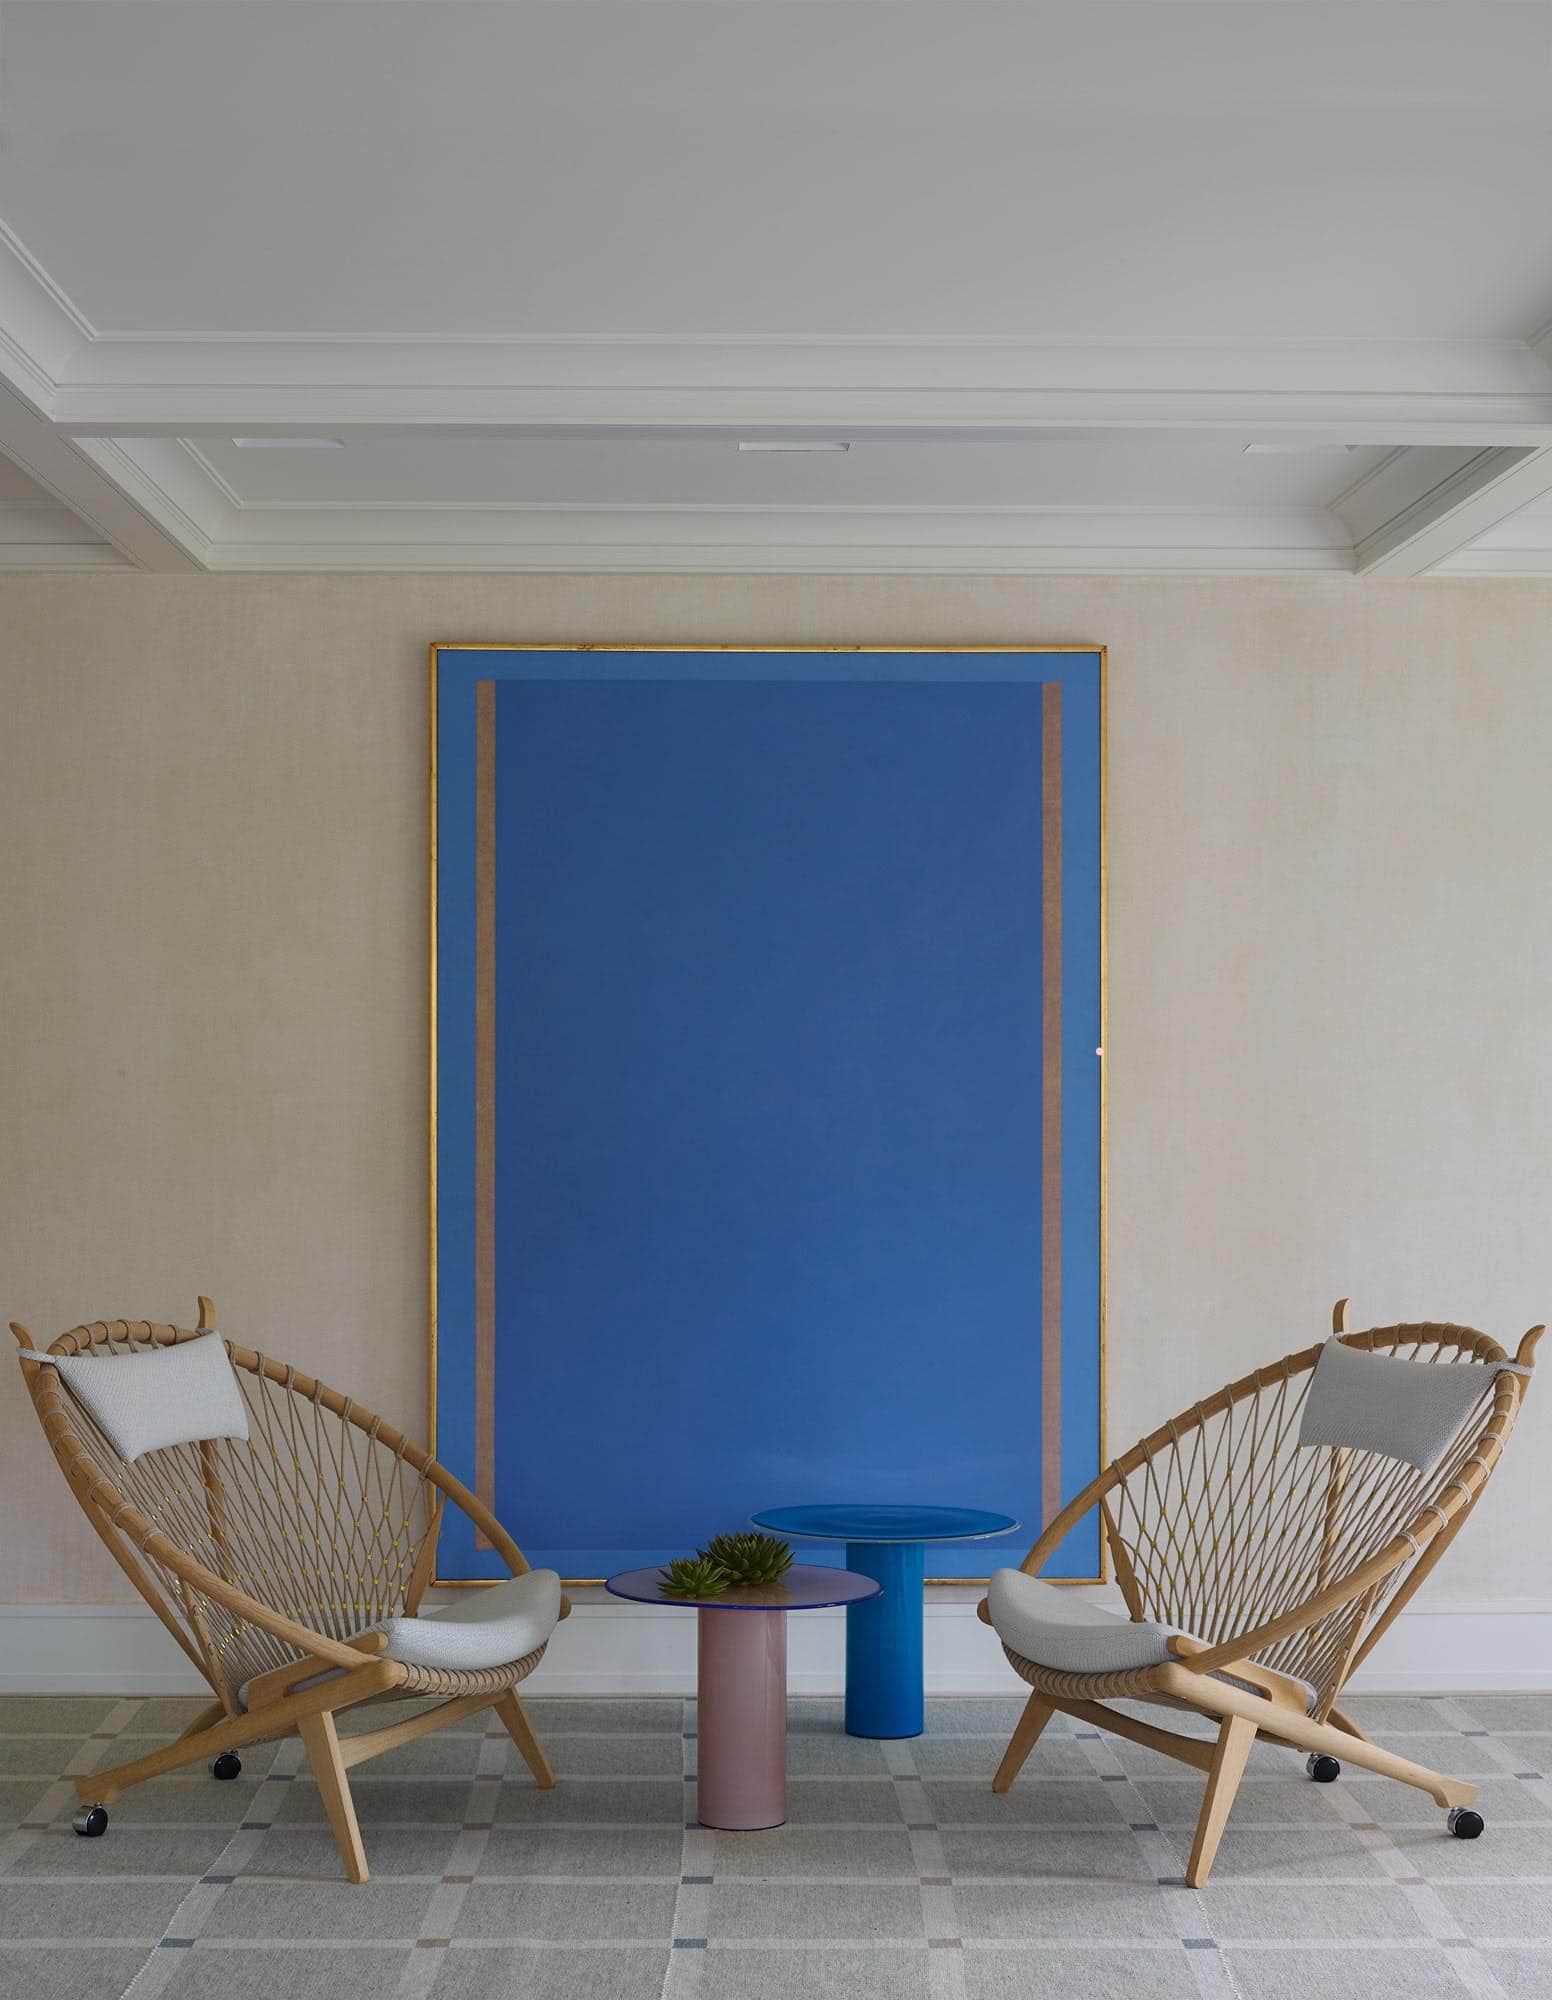 Designed by Carol Egan, this image shows a pair of Hans Wegner circle chairs flanking "Untitled", oil on Canvas painting by Artist Jorge Fick.  A hand-woven shaker grid area rug by Elizabeth Eakins is also visible.